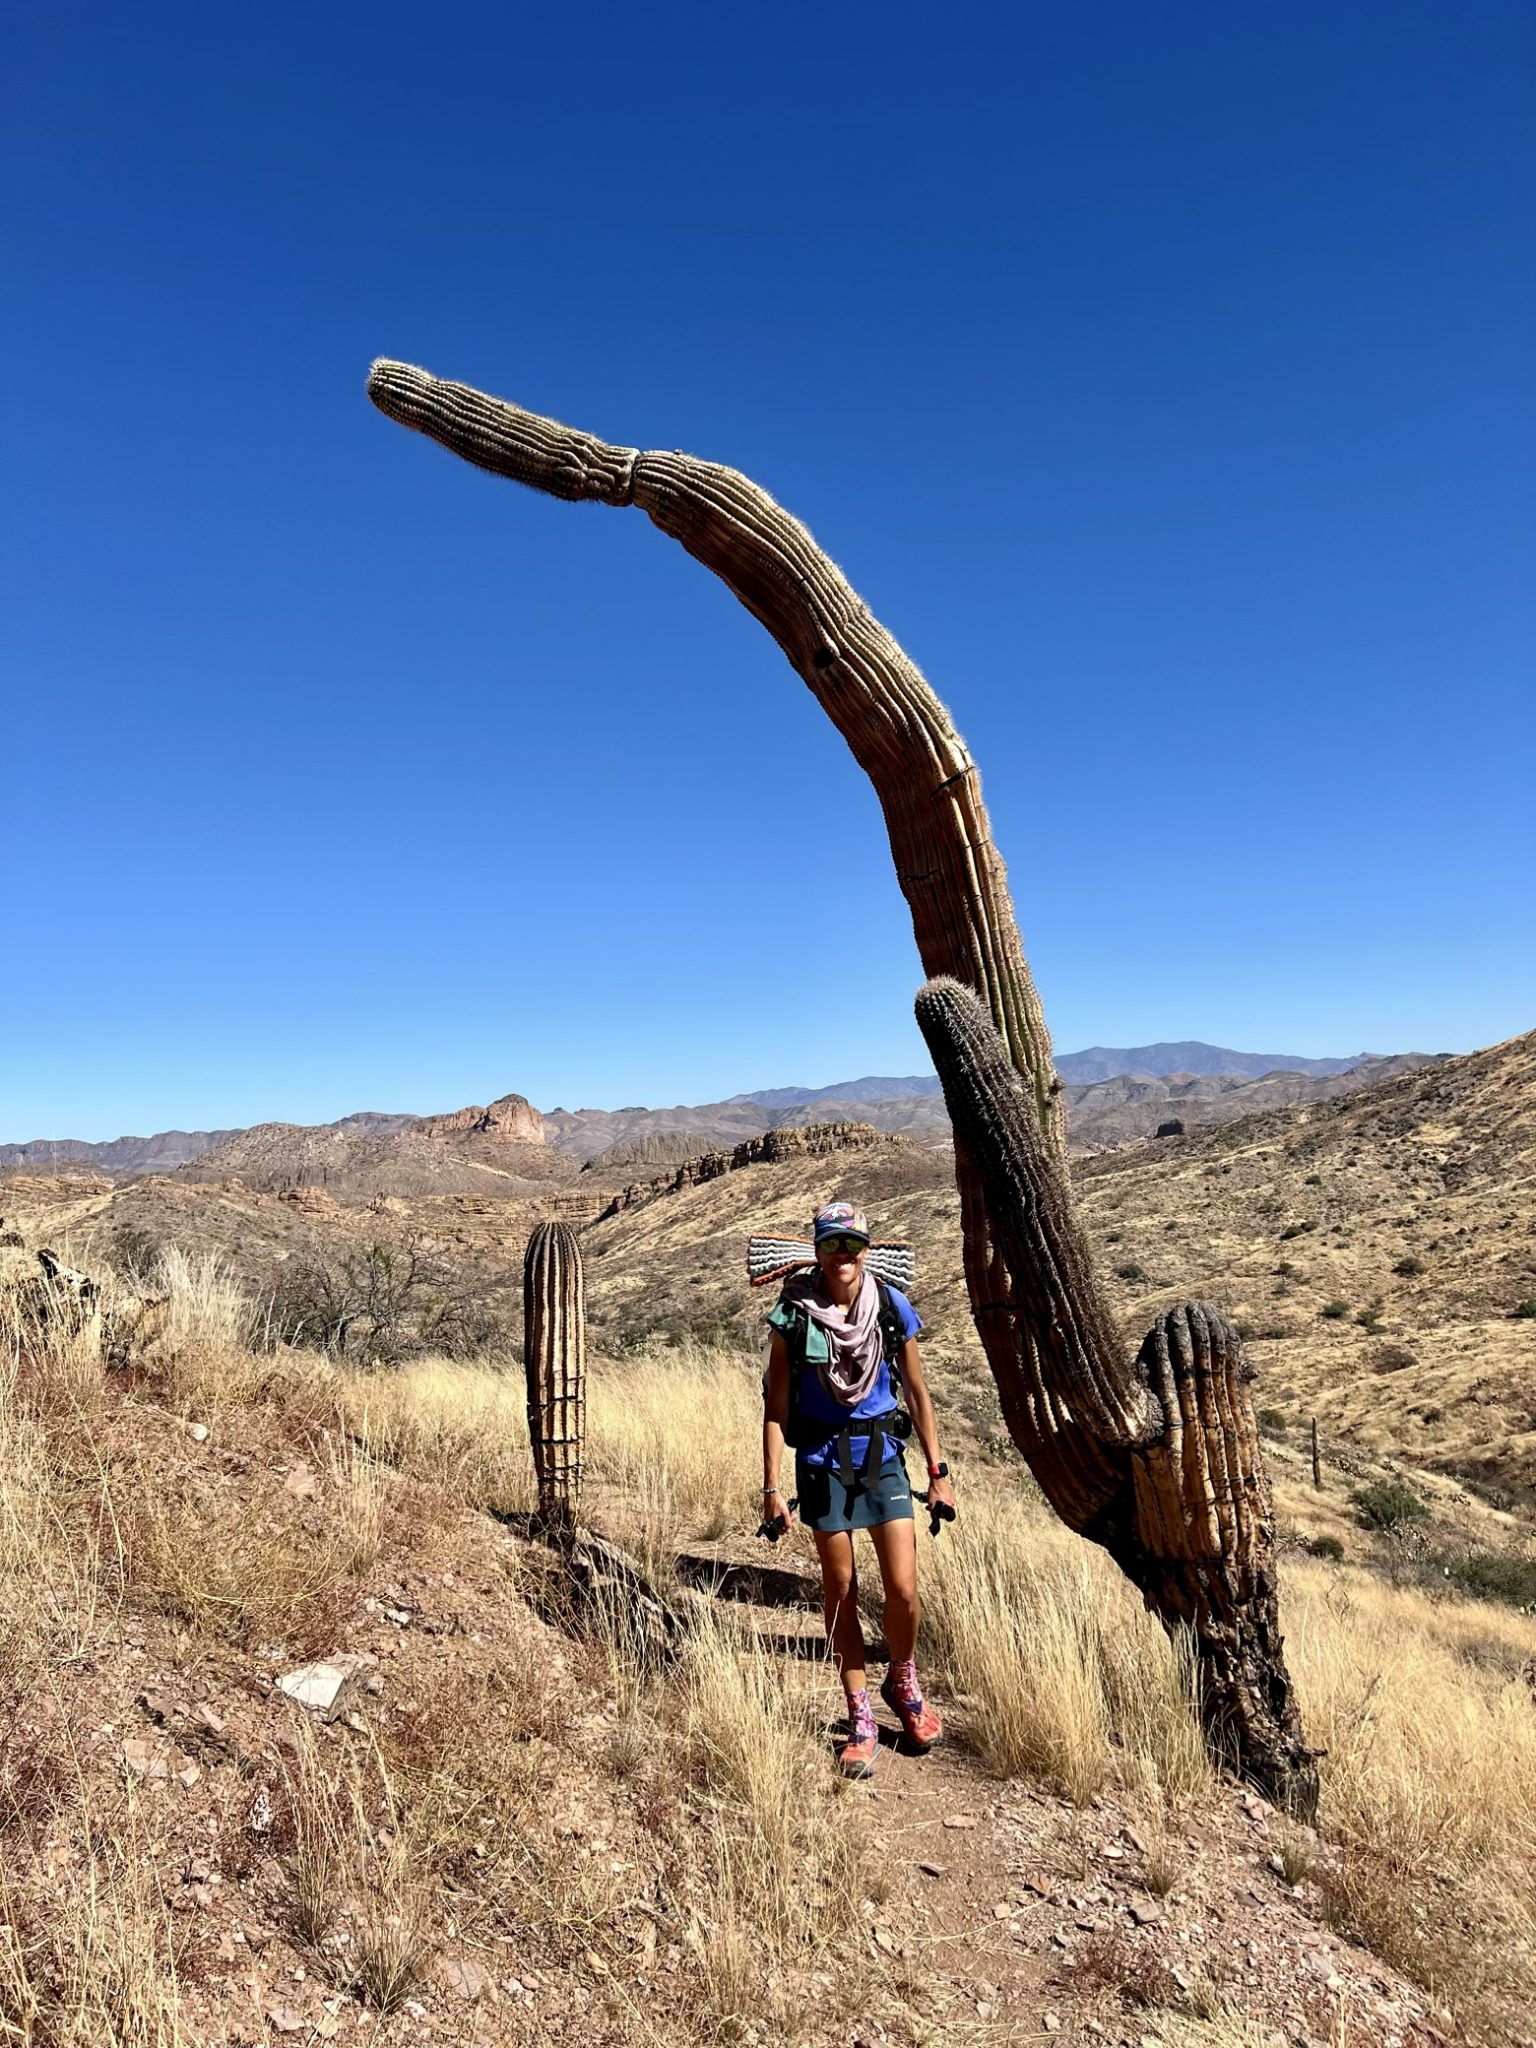 Ace and an arching saguaro